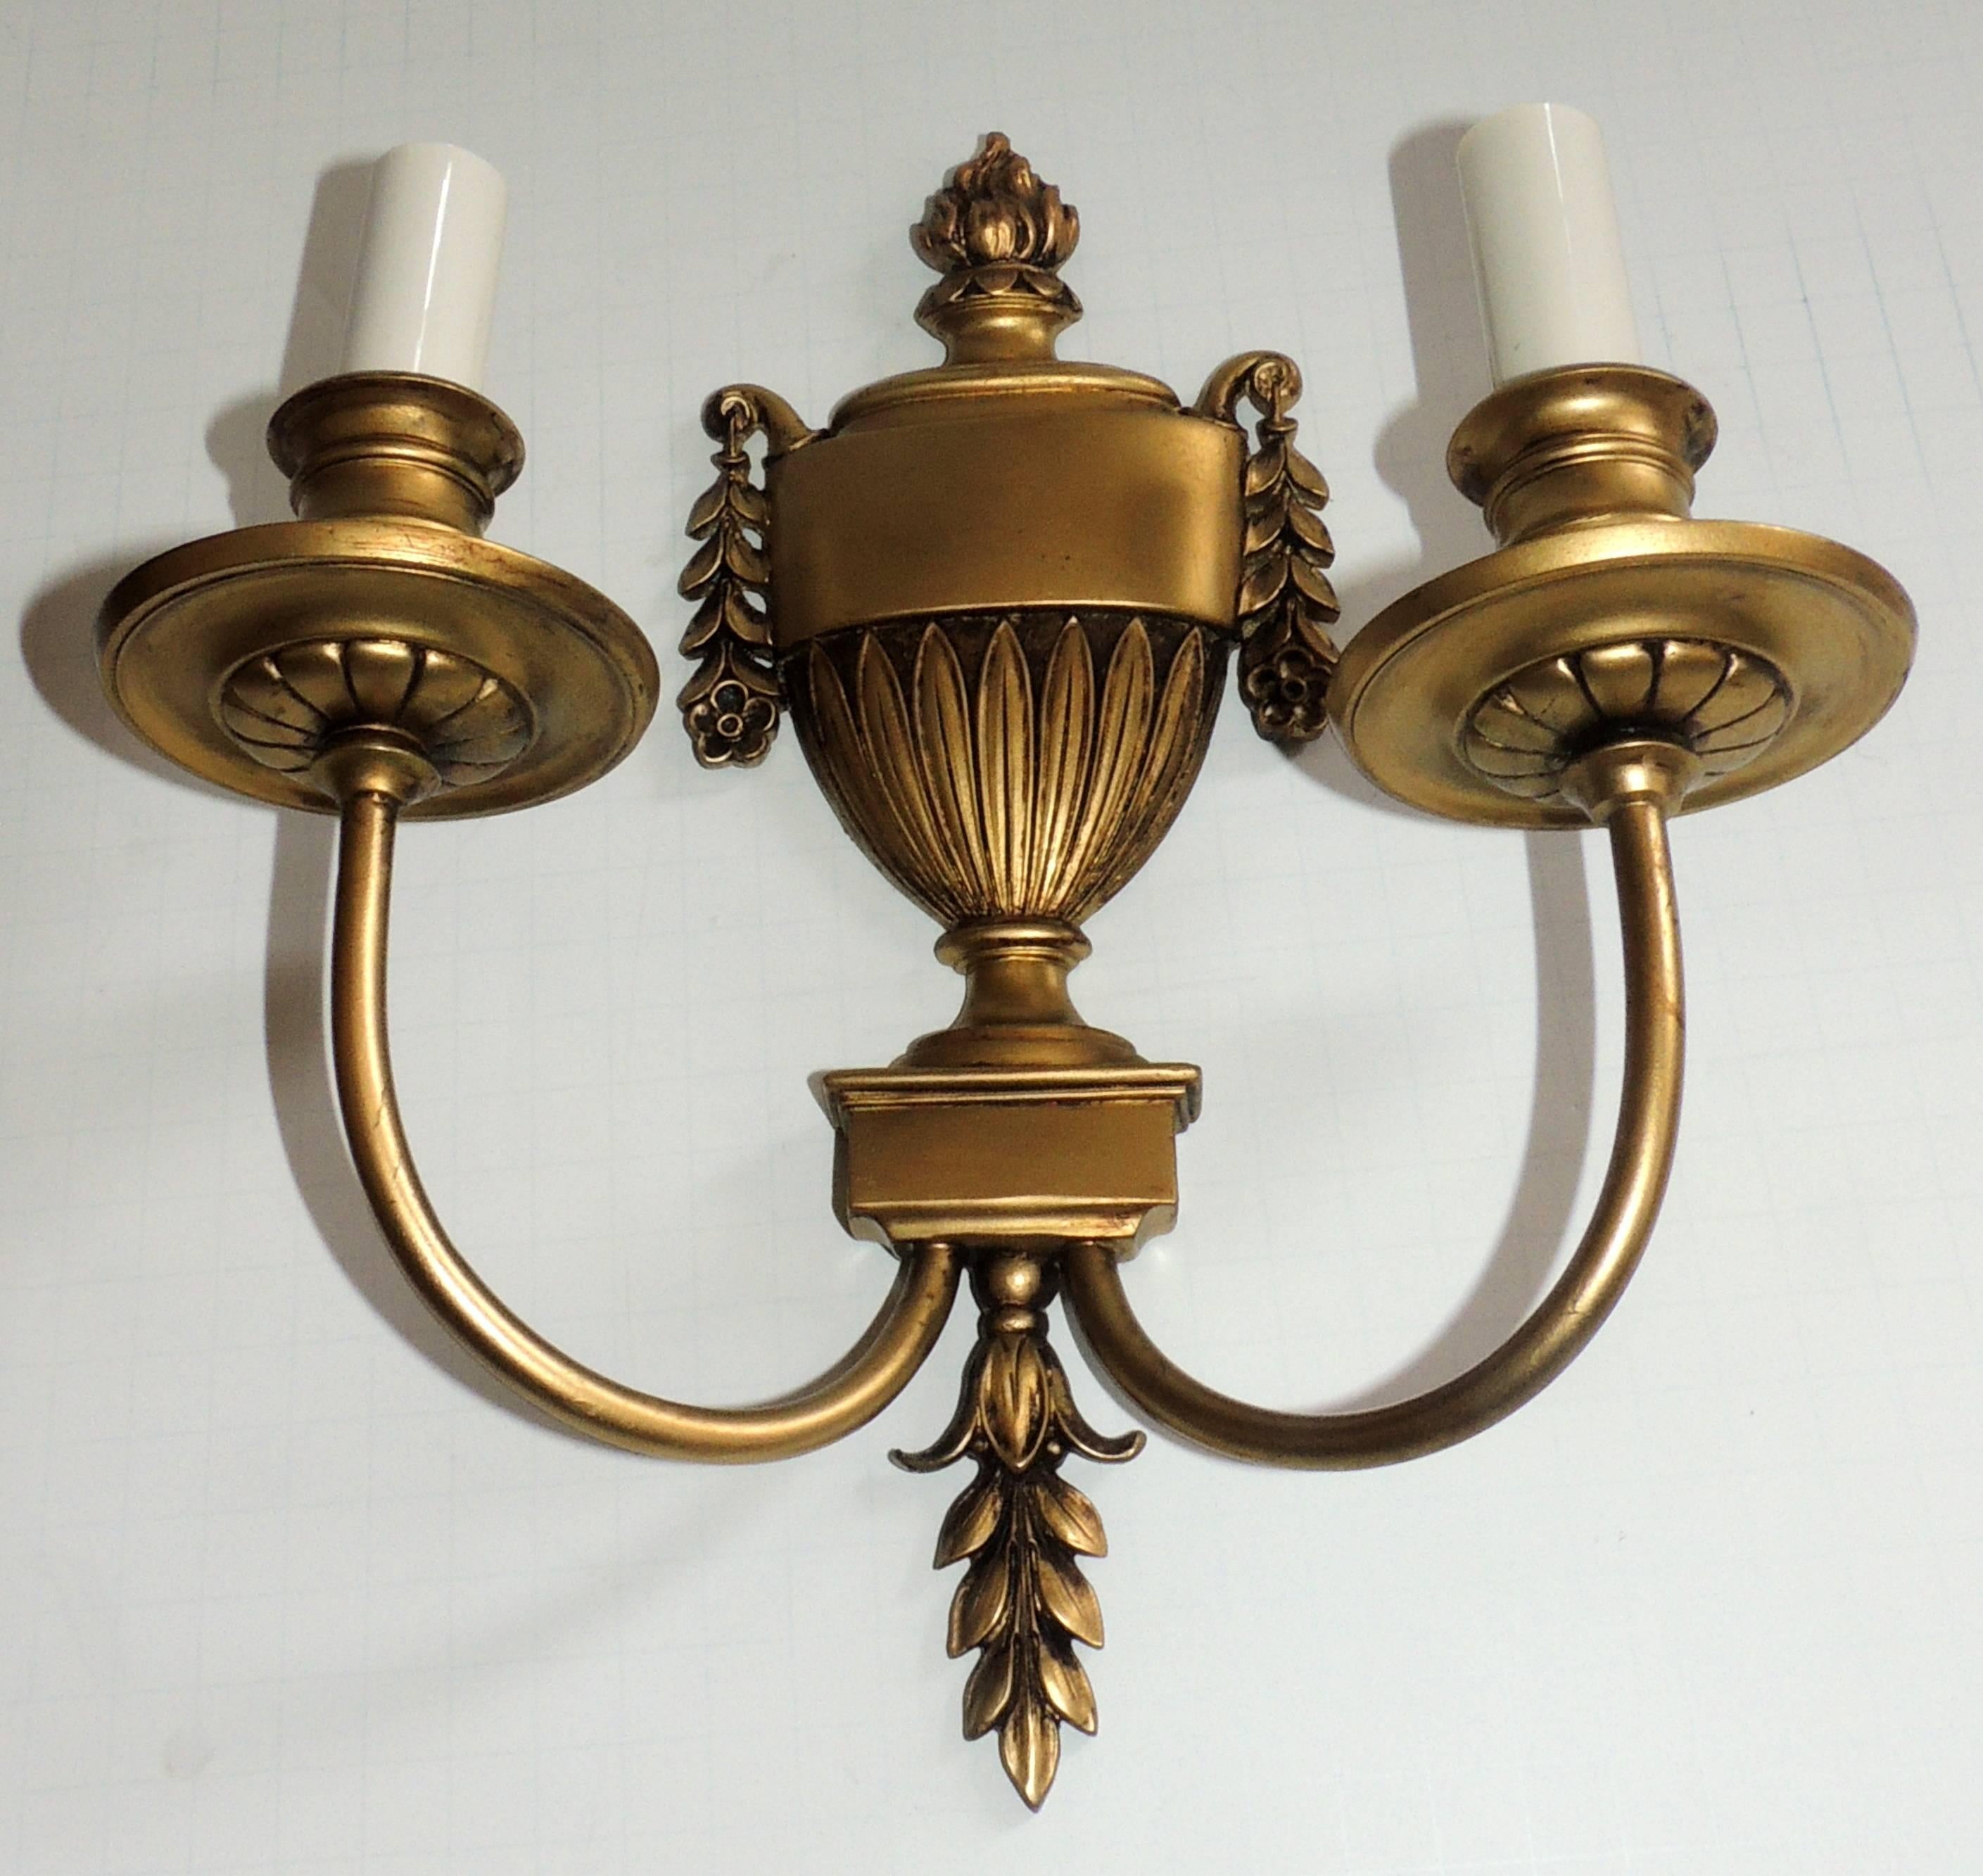 Wonderful Regency neoclassical pair of urn form and gilt bronze Empire style E.F. Caldwell two light wall sconces. Rewired with new sockets and ready to enjoy.